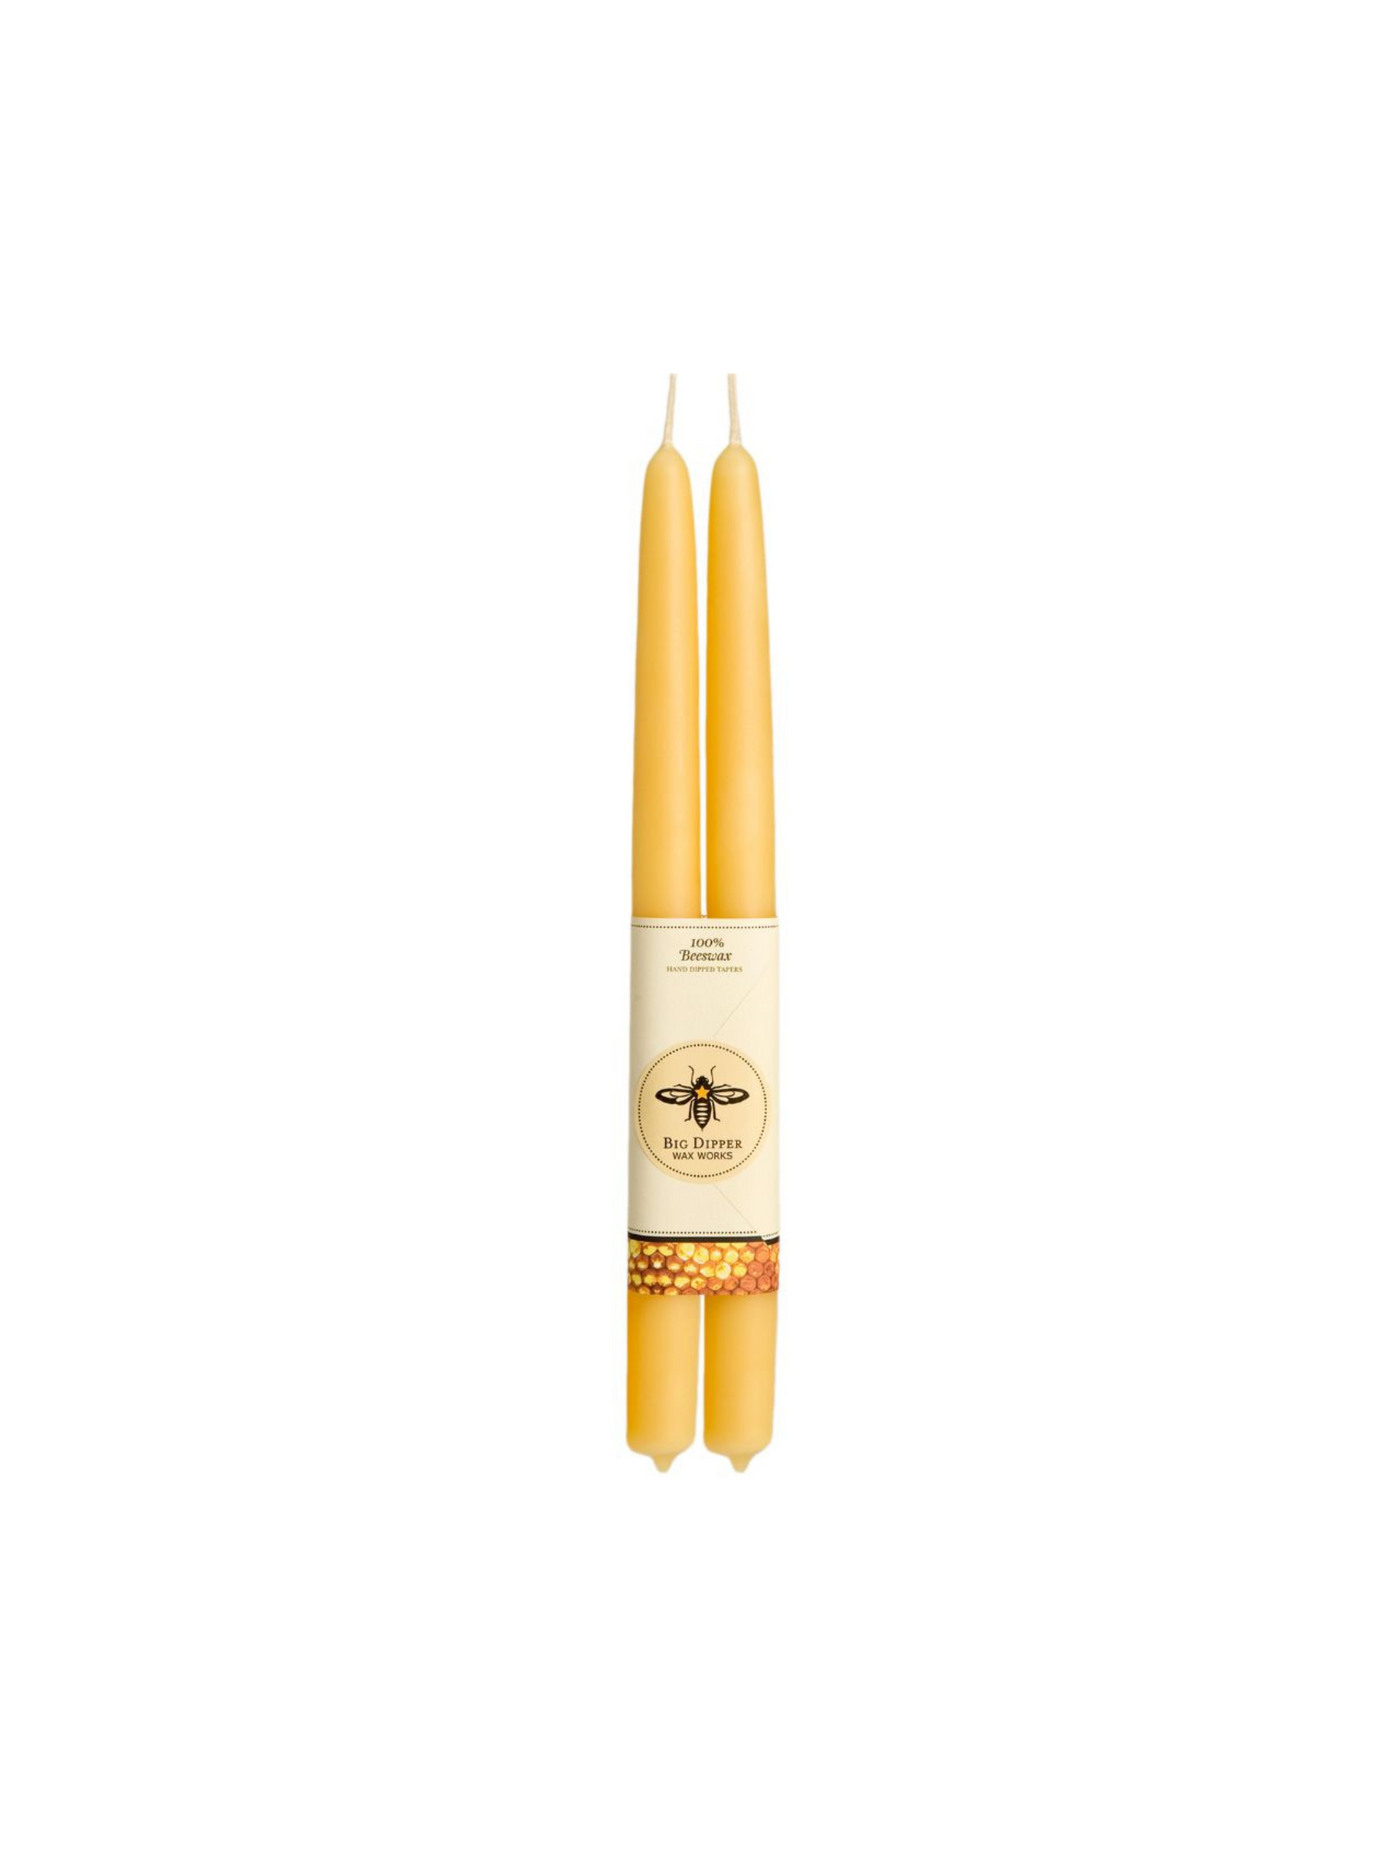 100% Beeswax Tapers